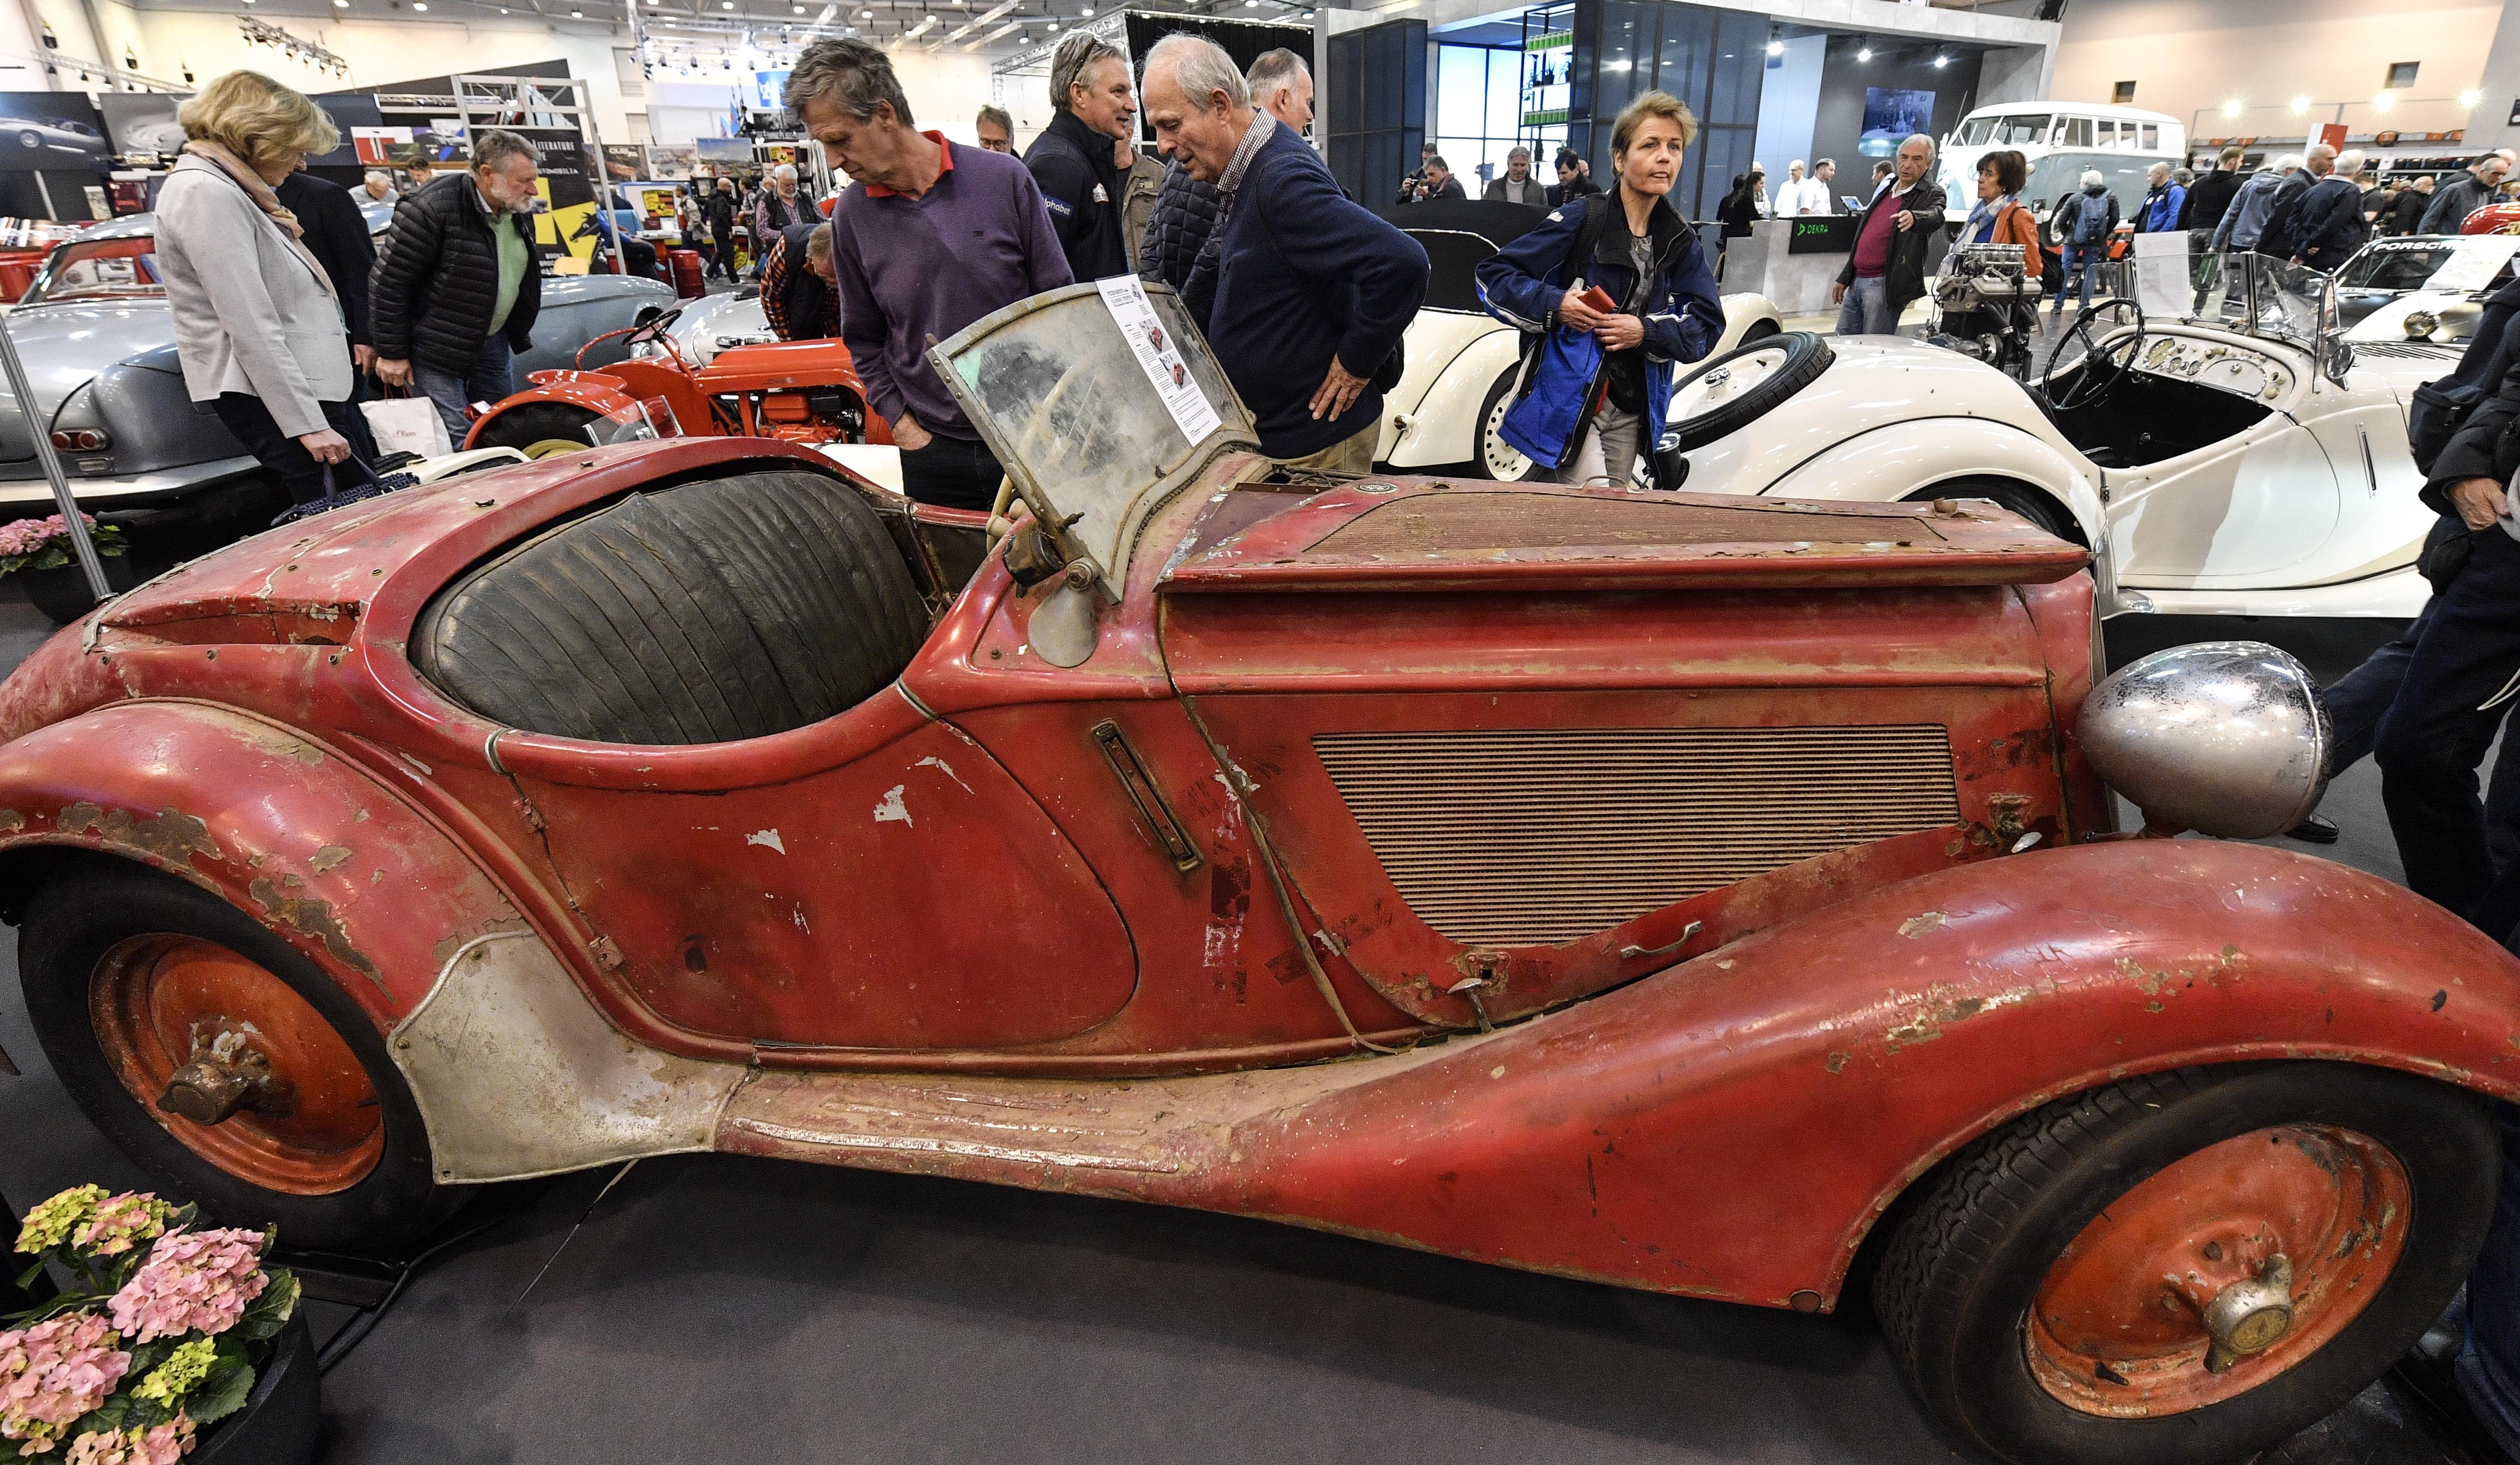 Visitors watch a BMW 328 Roadster from 1938 ready for restoration at the World Show for Vintage, Classic and Prestige Automobiles Techno-Classica in Essen, Germany, Friday, April 12, 2019. (AP Photo/Martin Meissner)